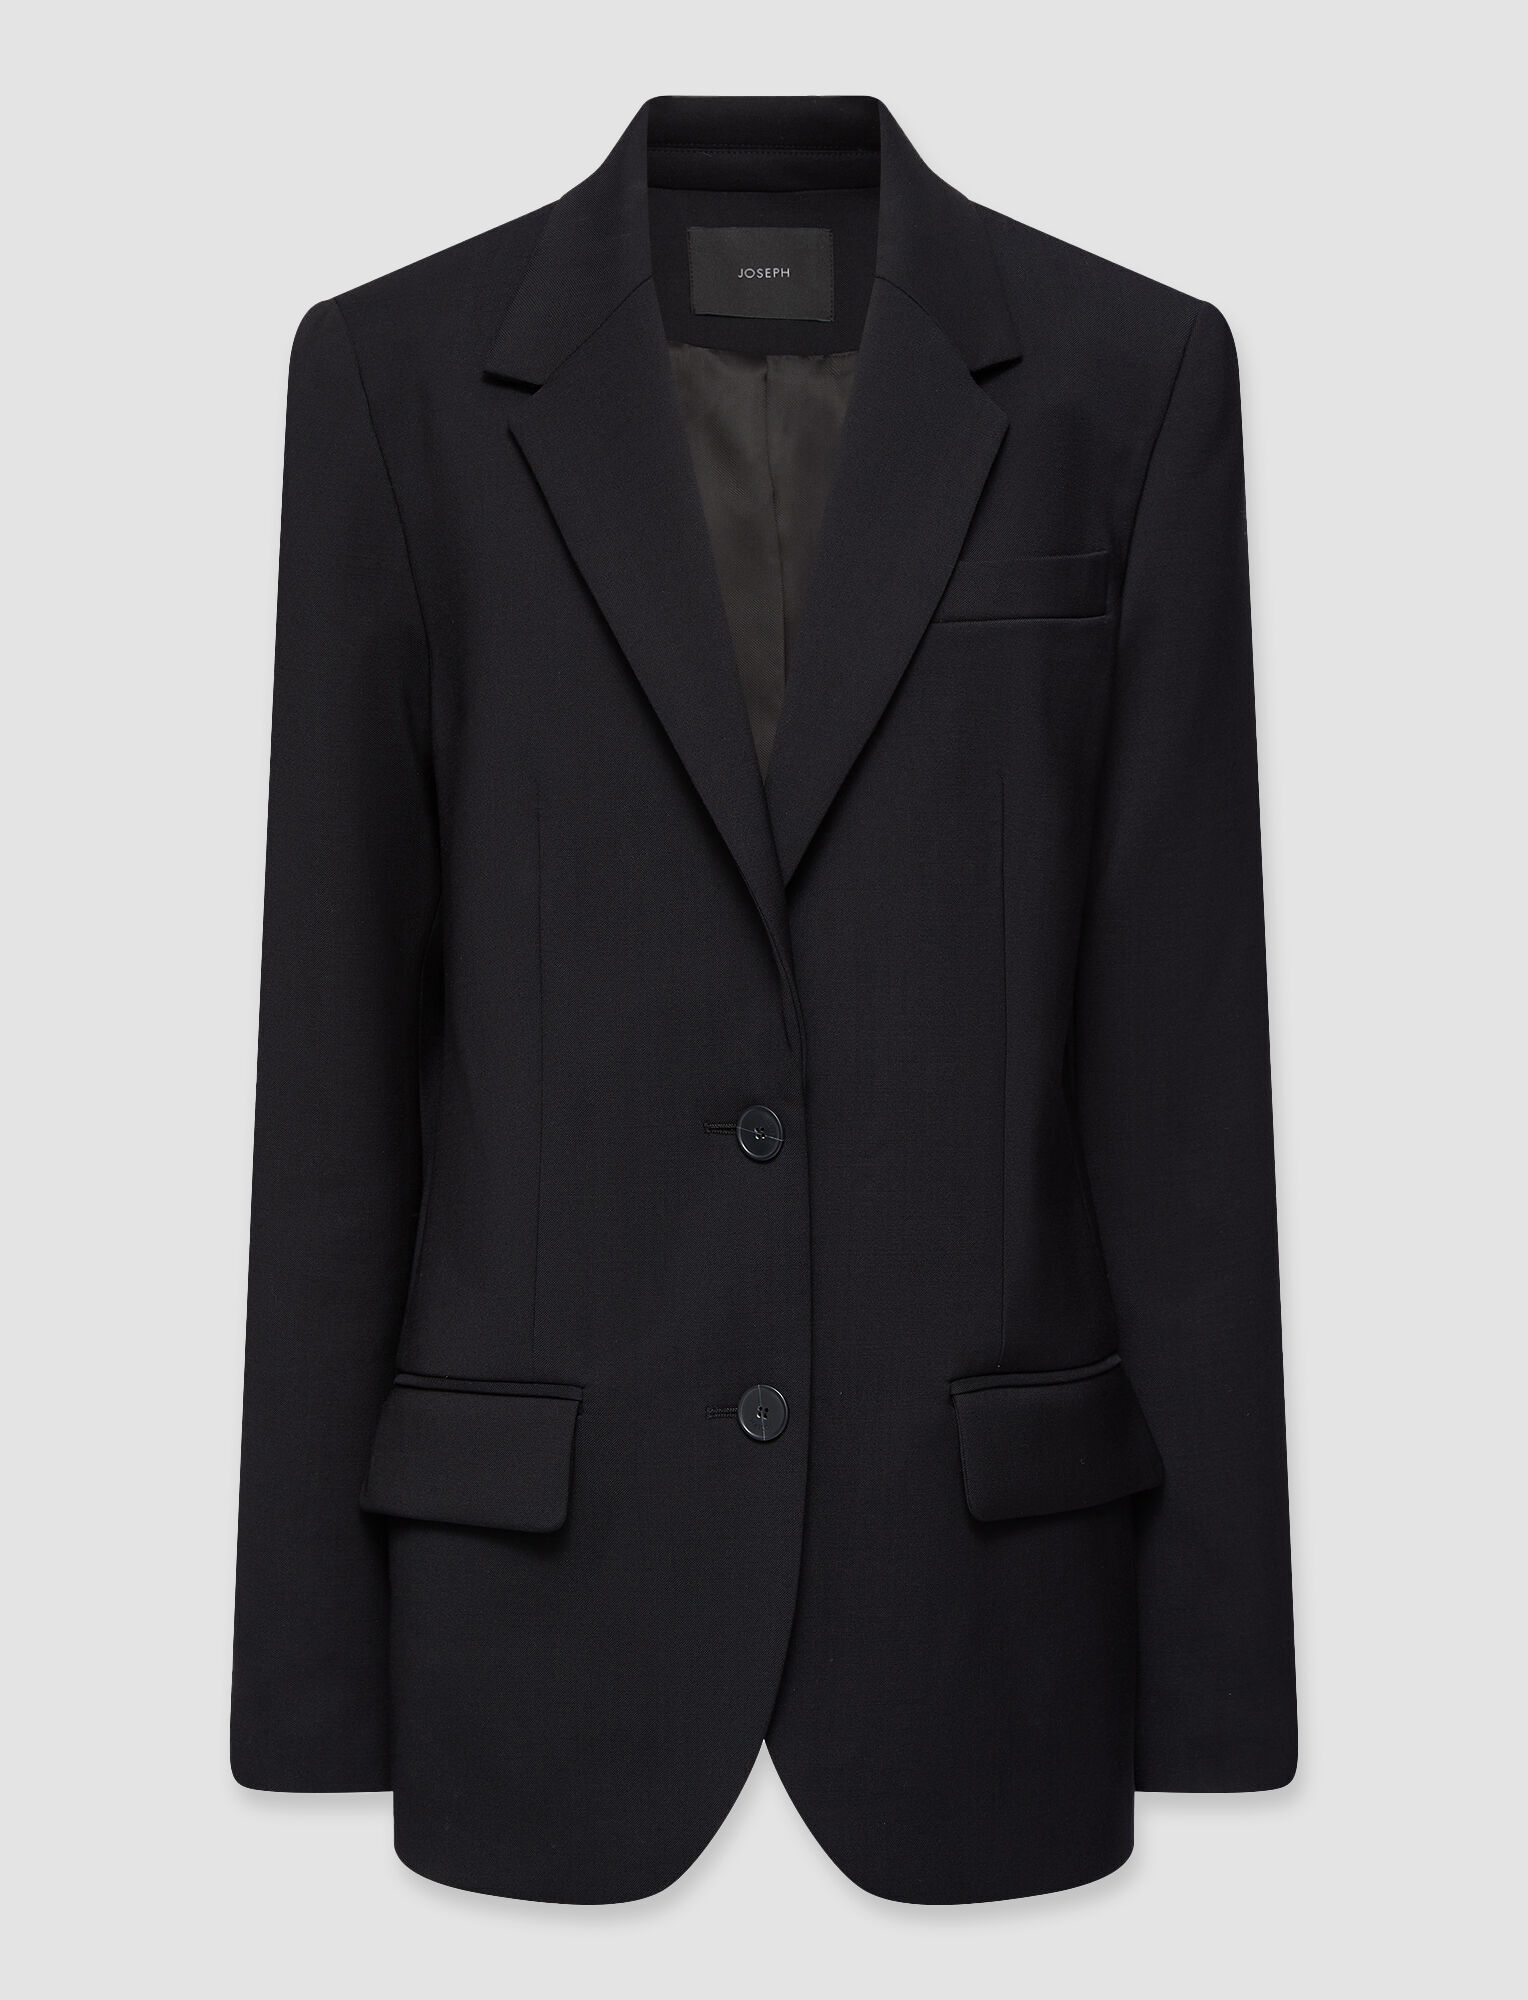 Joseph, Tailor Wool Stretch Jackie Tailored Jacket, in Black